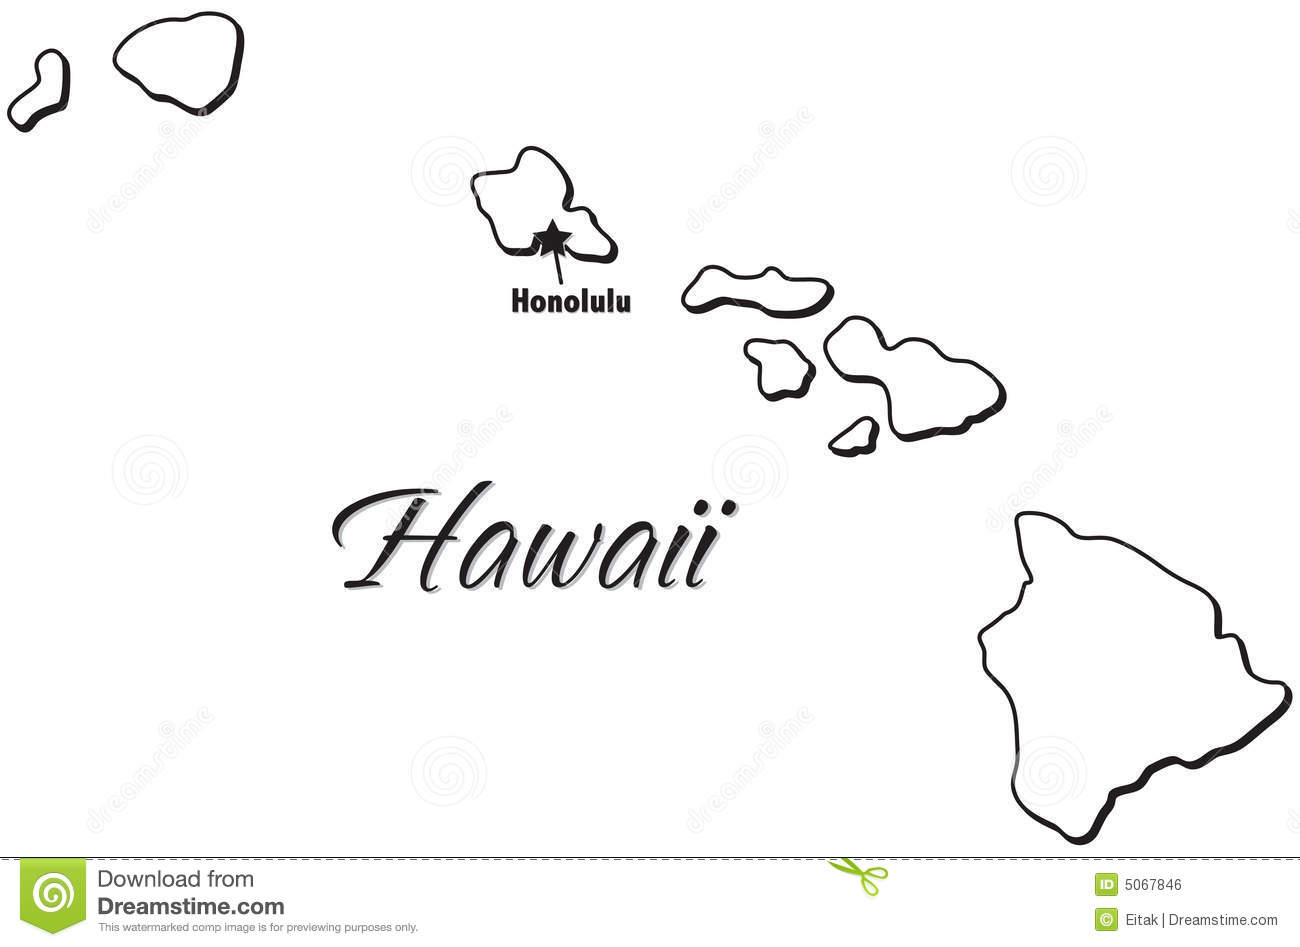 State Of Hawaii Outline Royalty Free Stock Image   Image  5067846